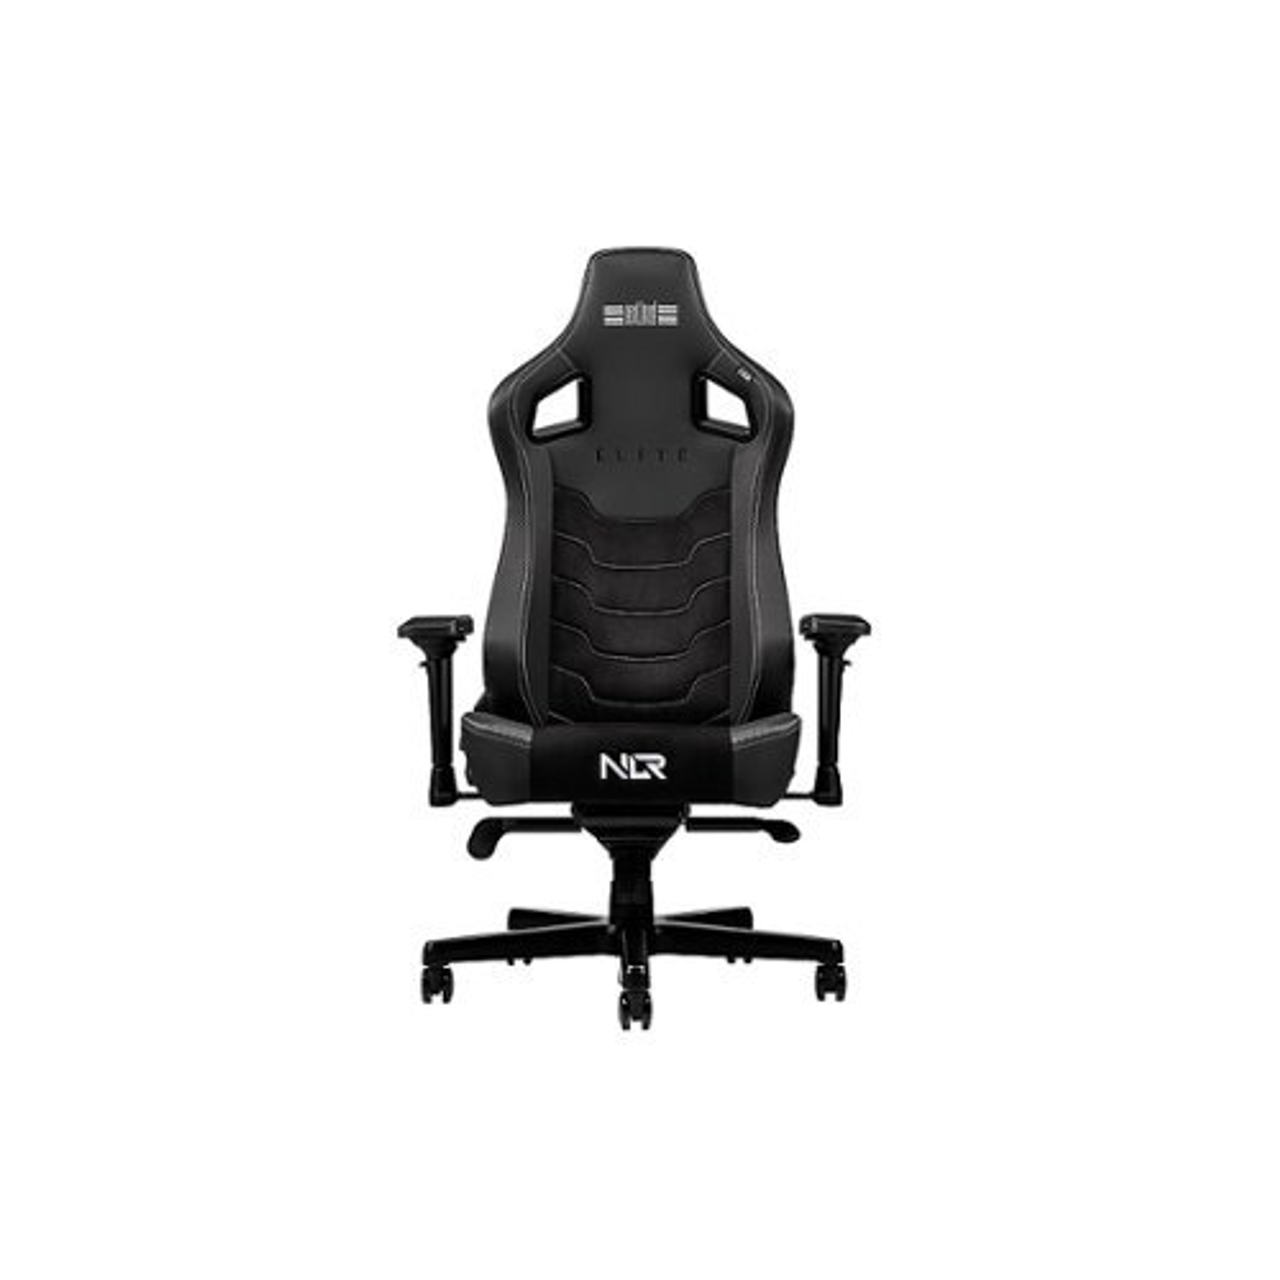 Next Level Racing - Elite Gaming Chair Leather and Suede Edition - Black